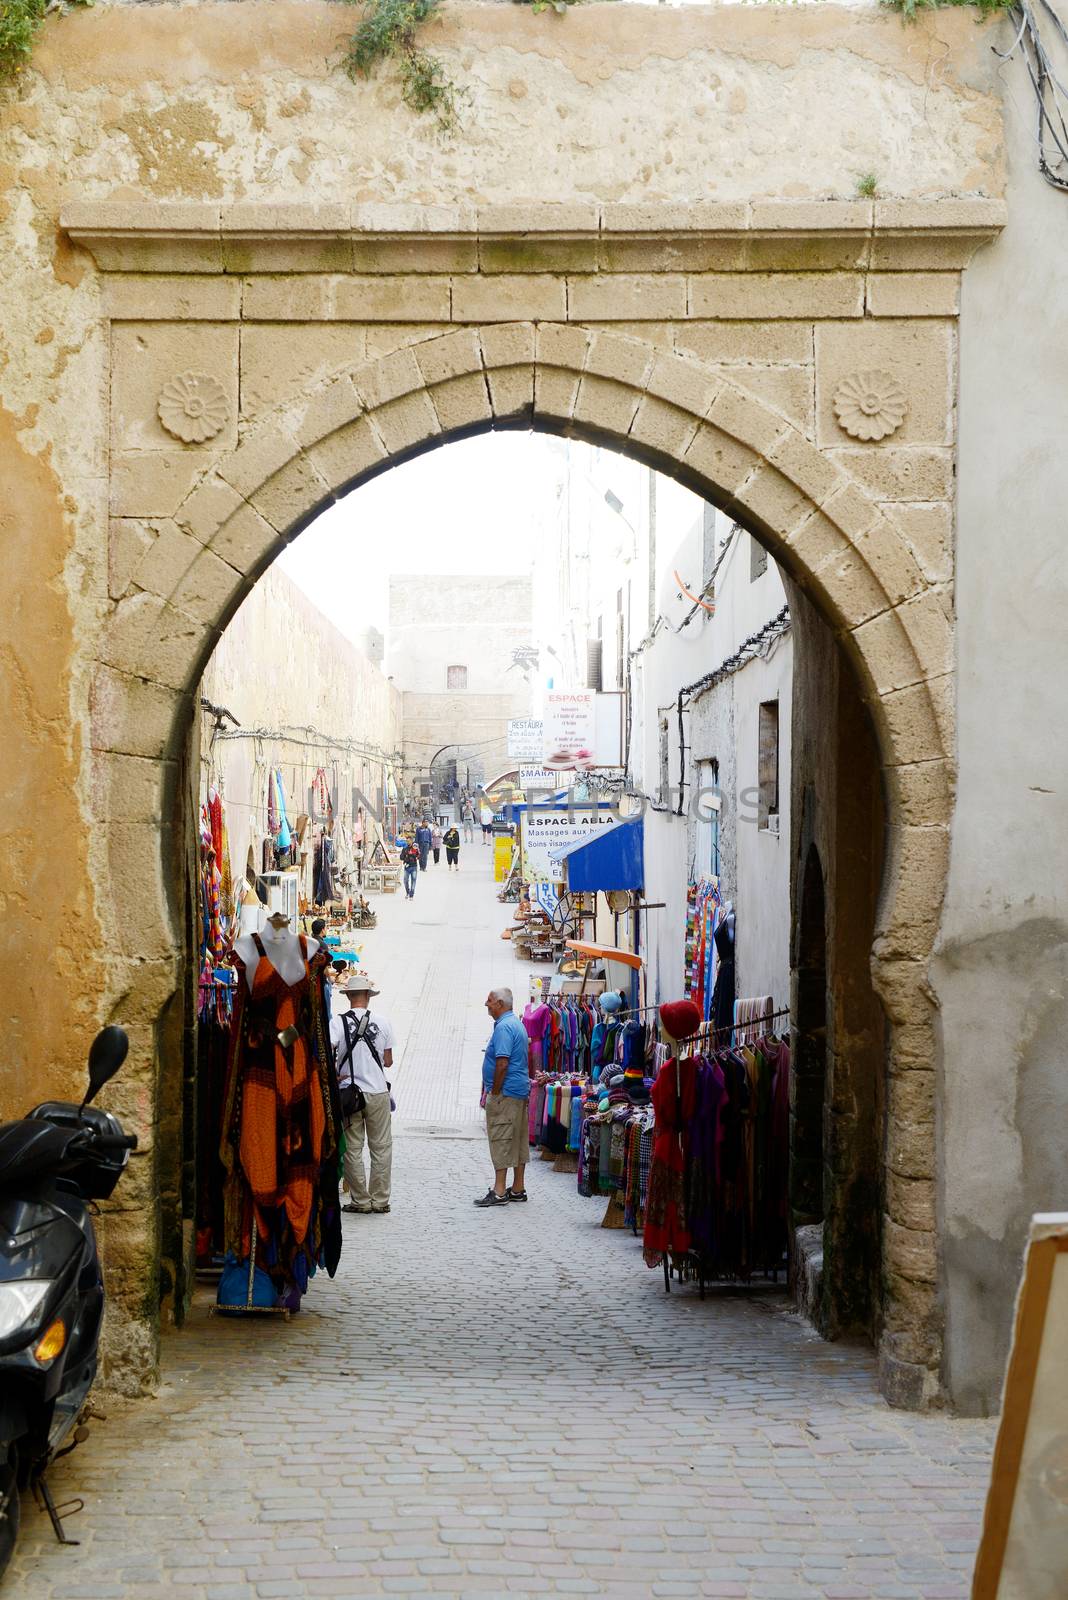 Morocco street scene by kmwphotography